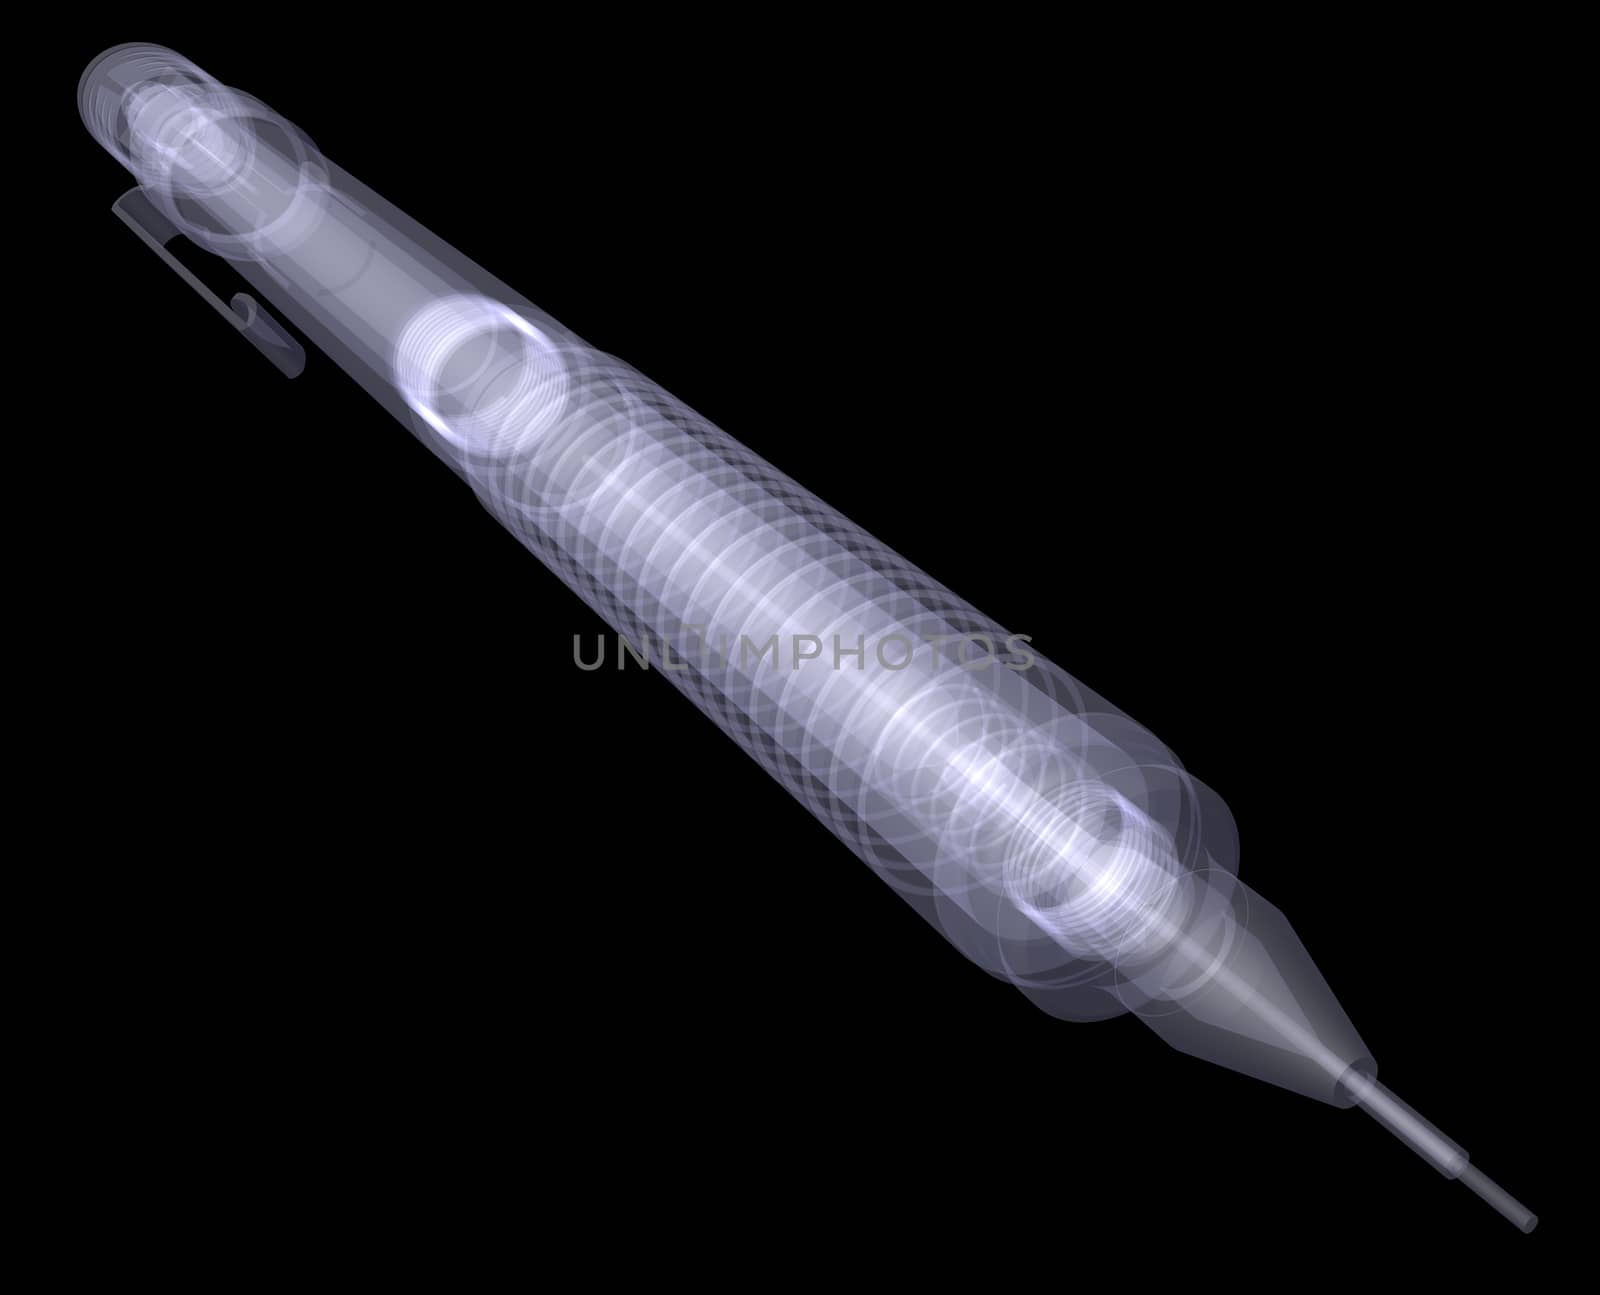 Automatic pencil. X-ray render isolated on black background